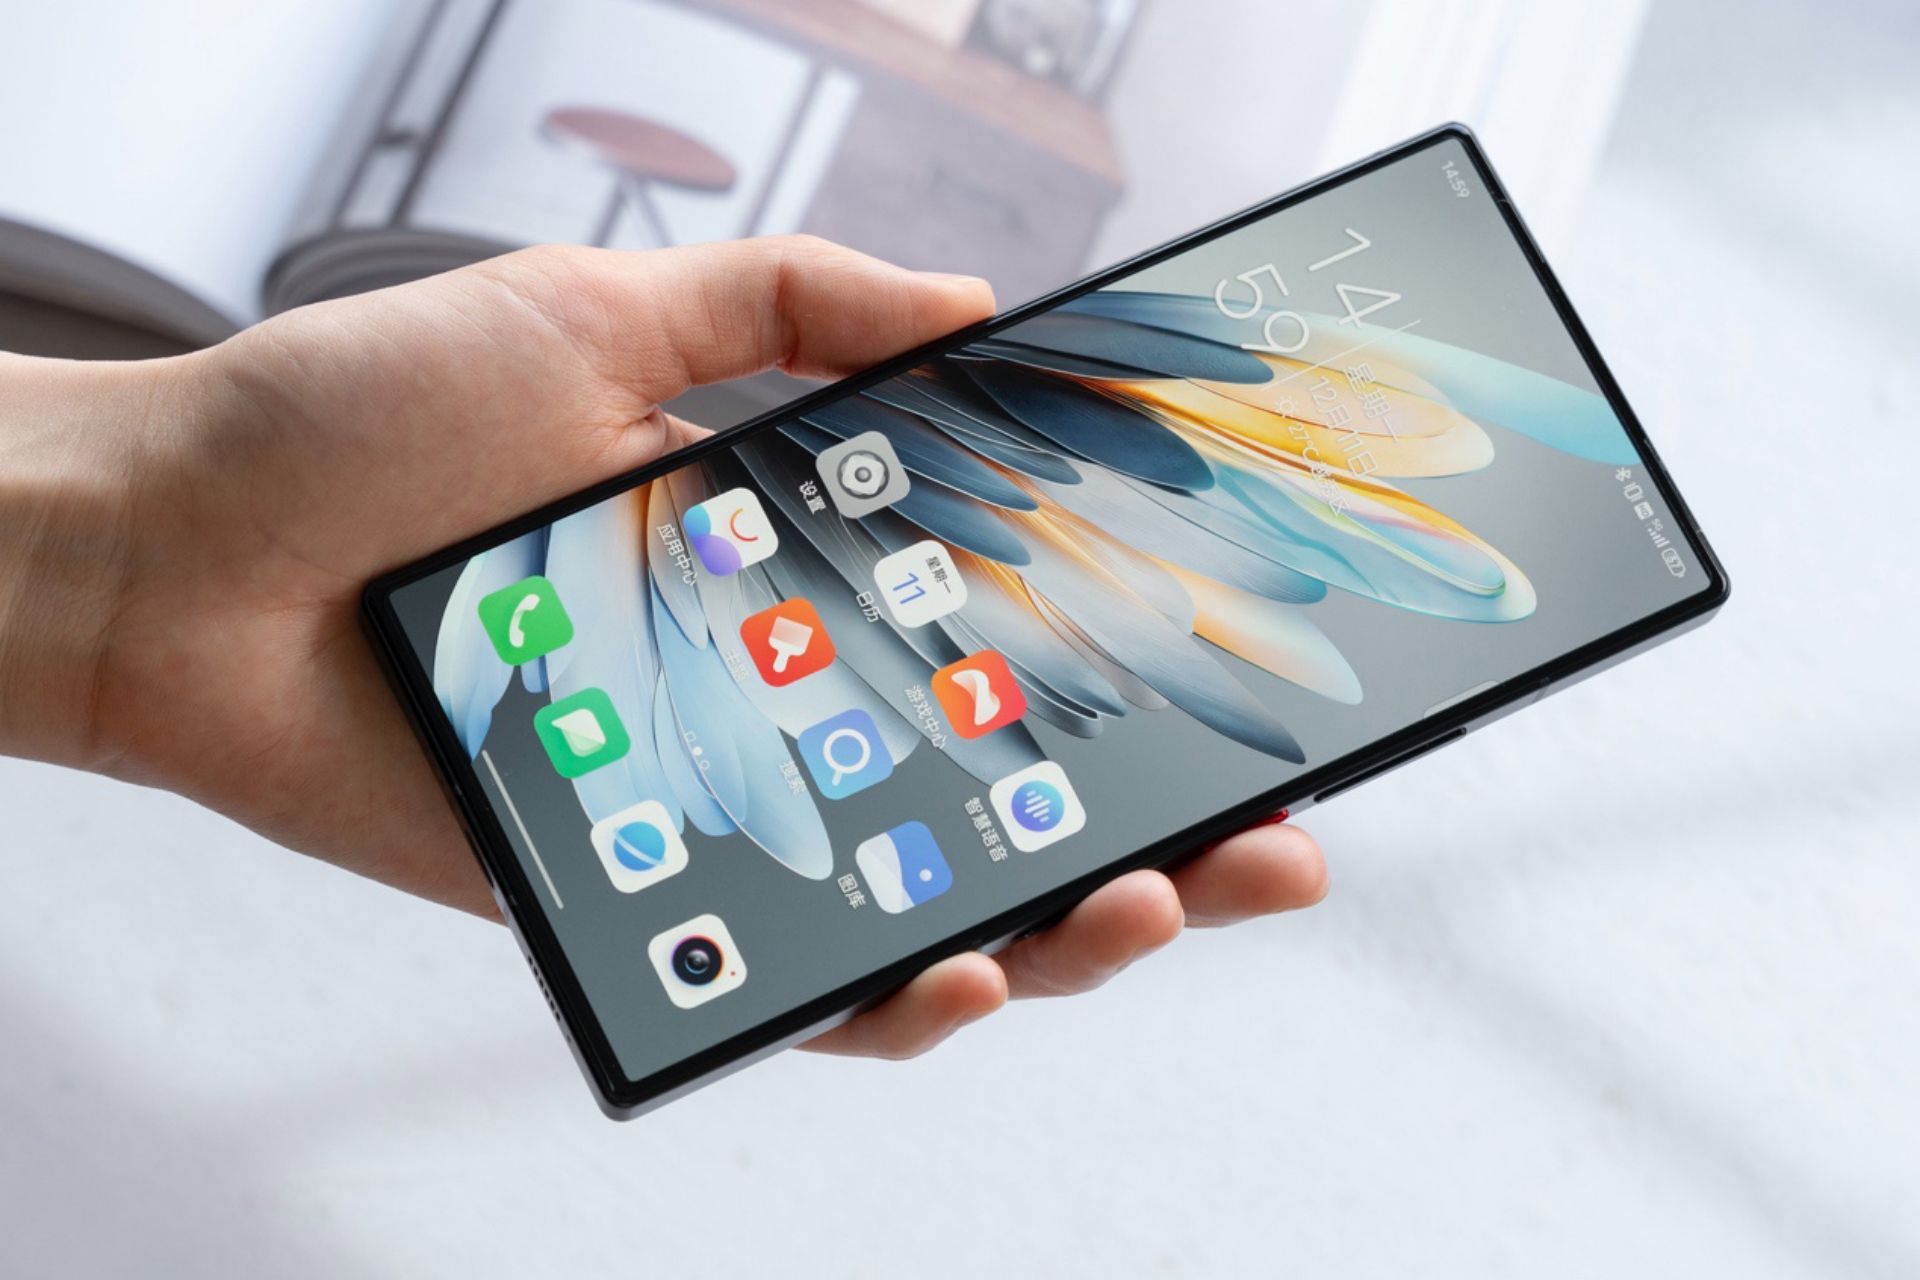 Nubia Z60 Ultra hand on Experience: Hardcore direct-screen image flagship  phone